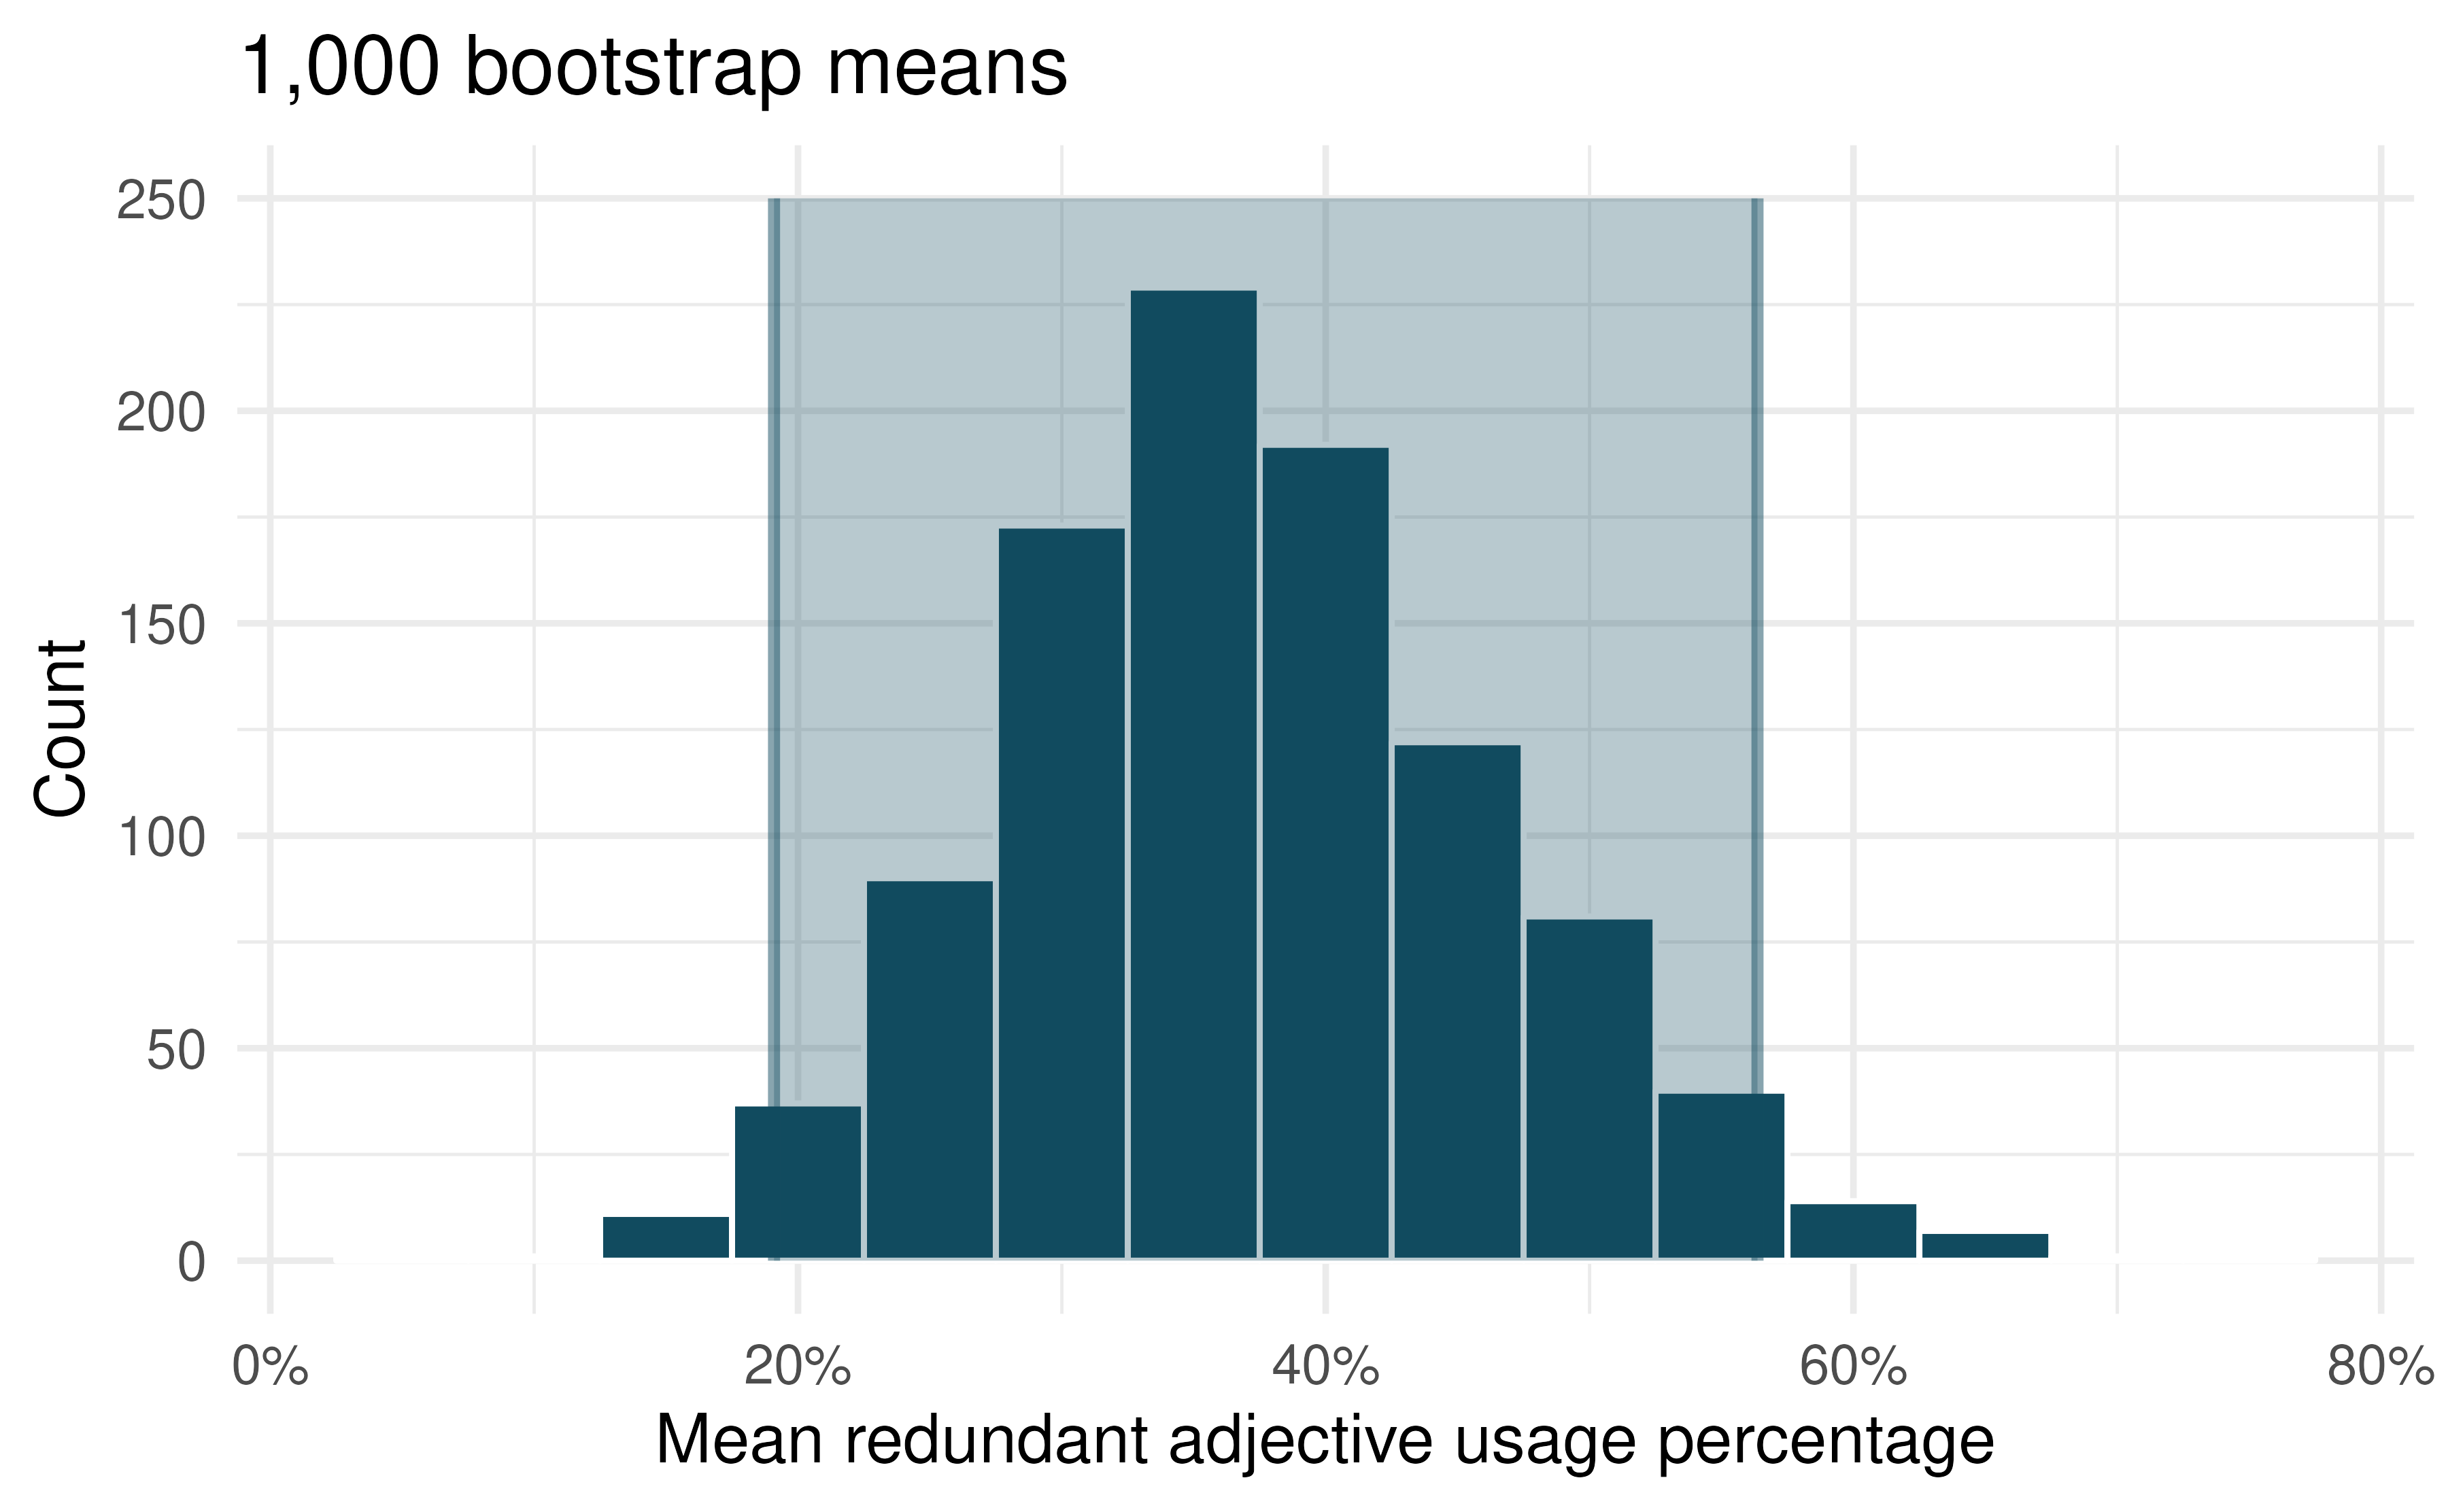 Distribution of 1,000 bootstrapped means of redundant adjective usage percentage among English speakers who were shown four items in images. Overlaid on the distribution is the 95% bootstrap percentile interval that ranges from 19.1% to 56.4%.